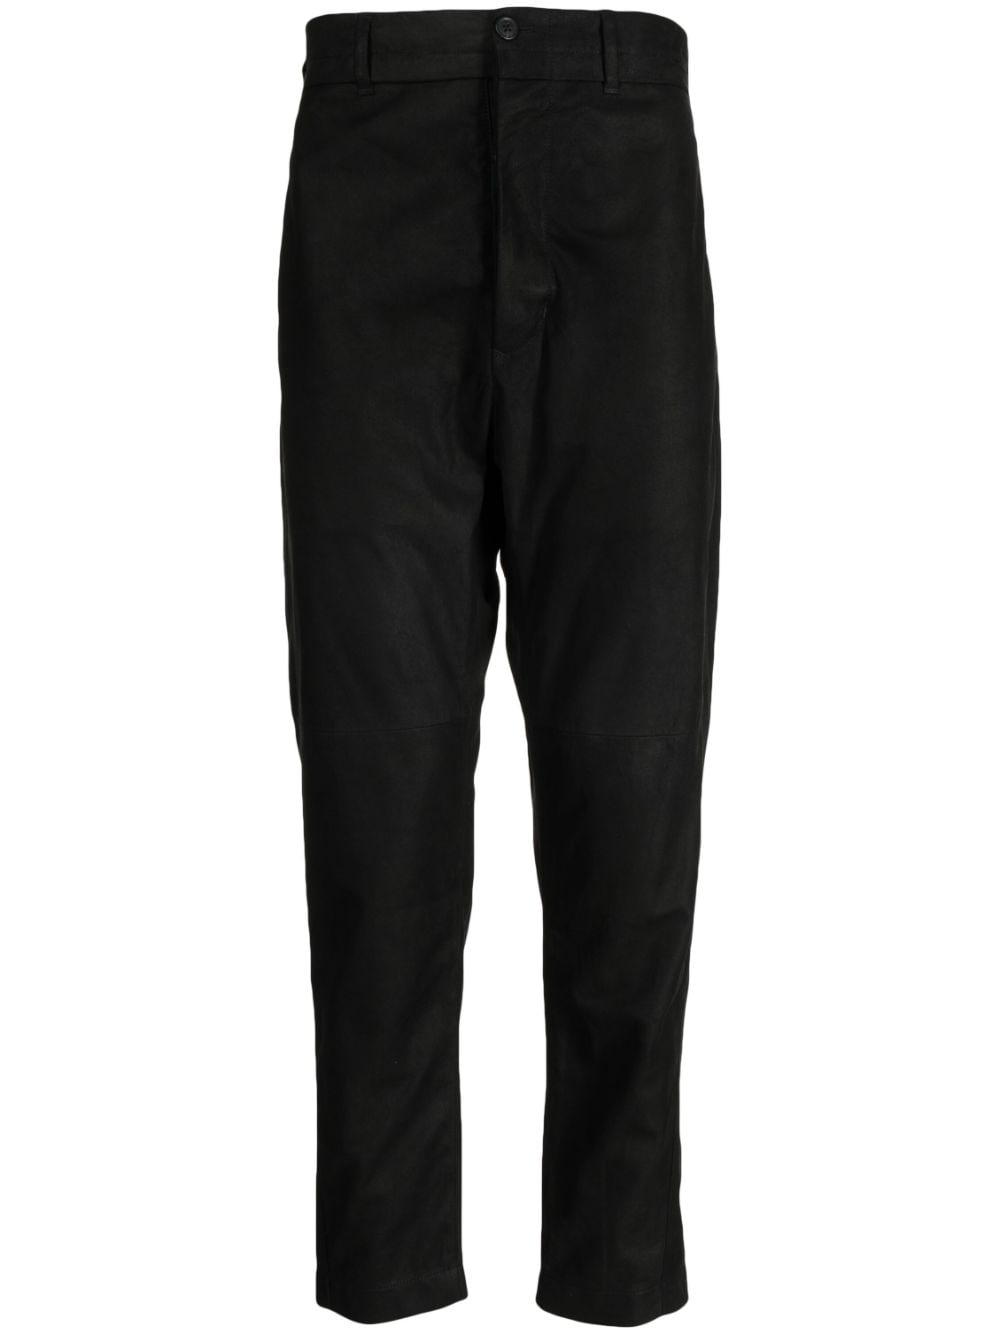 Ann Demeulemeester cropped leather trousers - Black von Ann Demeulemeester